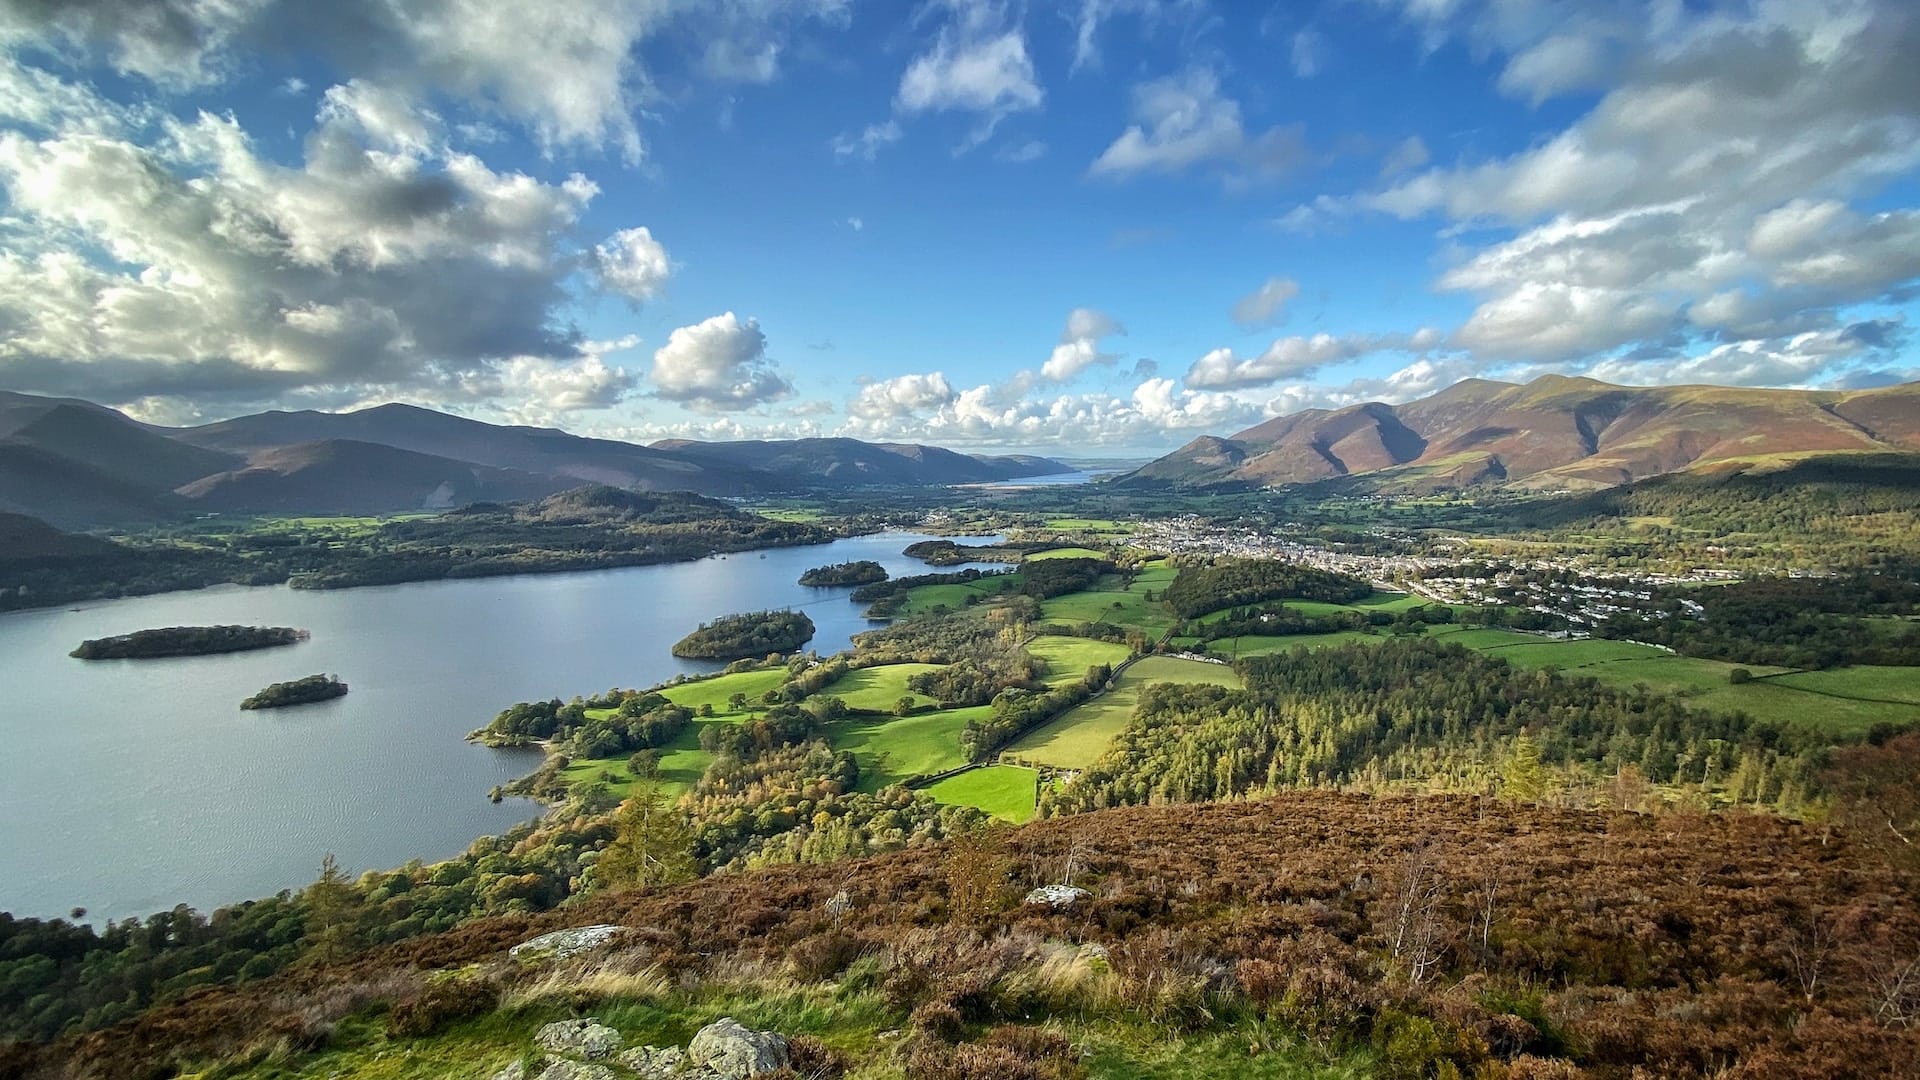 Elopement packages in the Lake District with an all-inclusive option